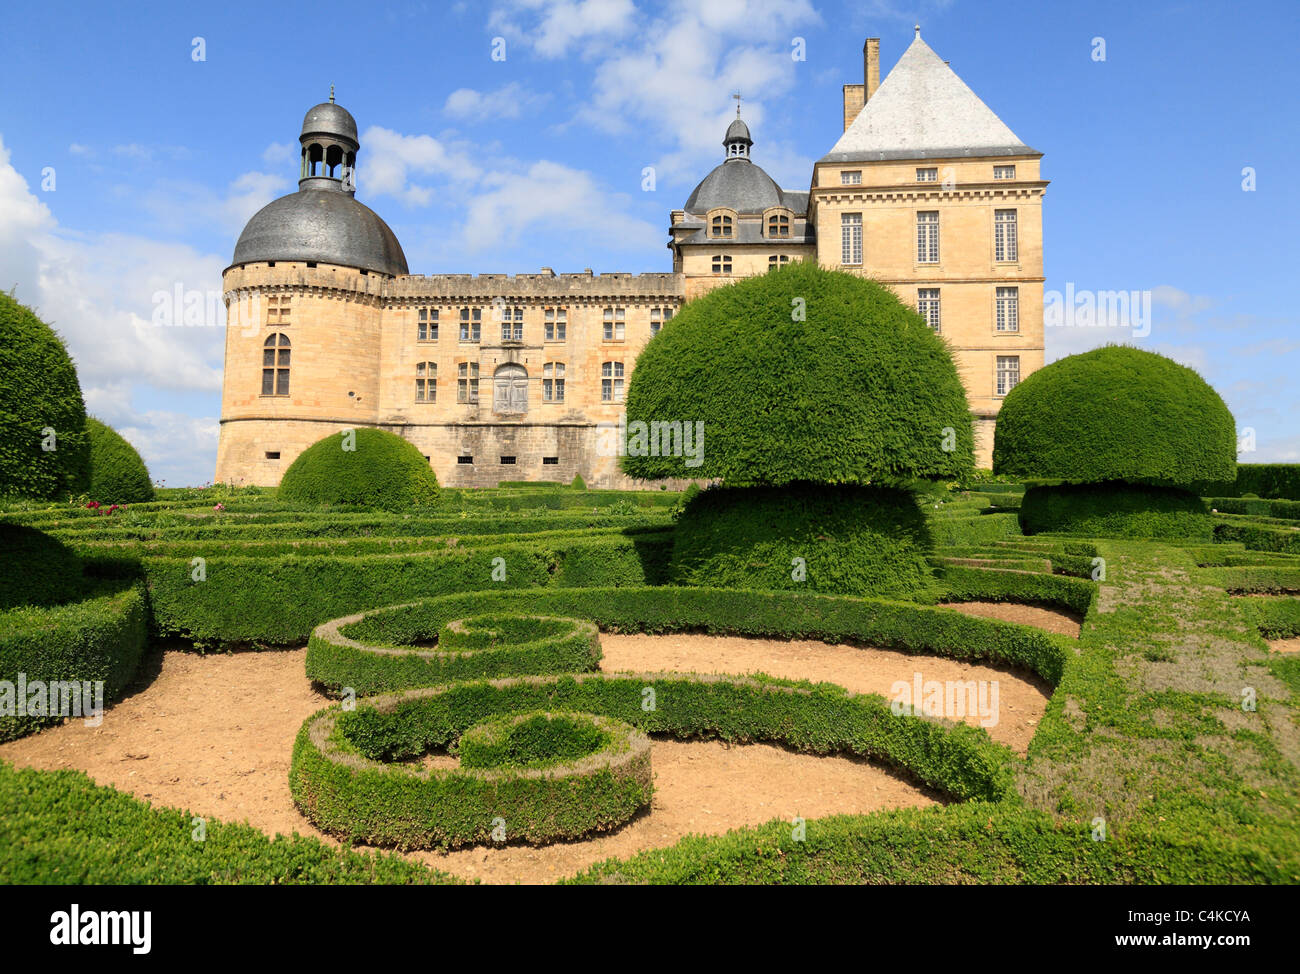 Formal French gardens with geometric Box hedges and topiary Renaiissance Chateau de Hautefort Dordogne Aquitaine France Stock Photo